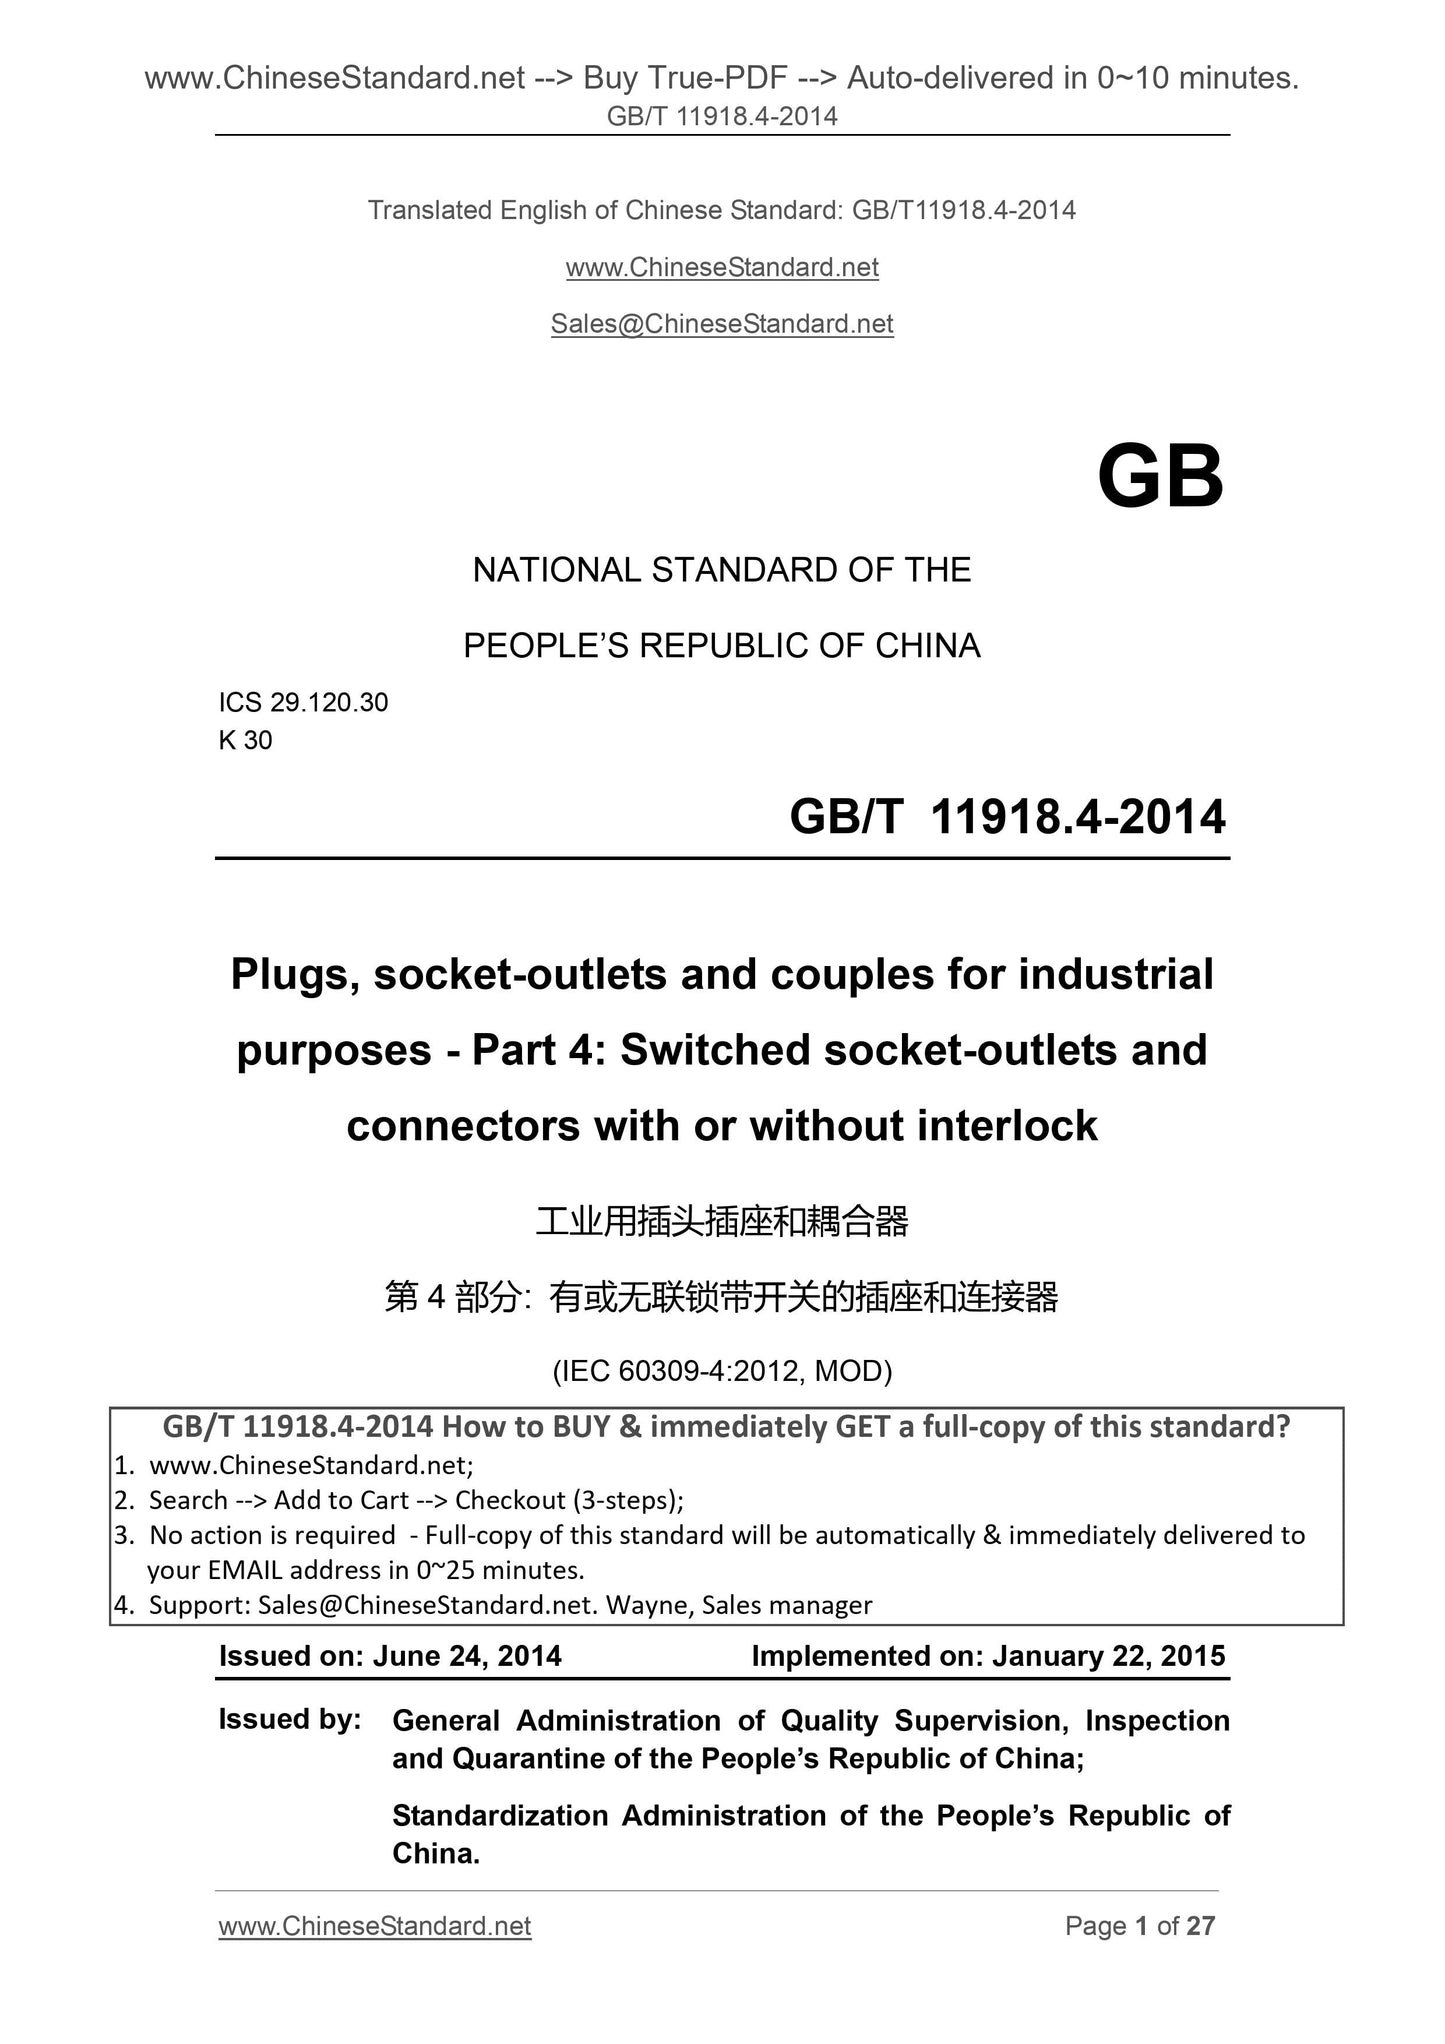 GB/T 11918.4-2014 Page 1